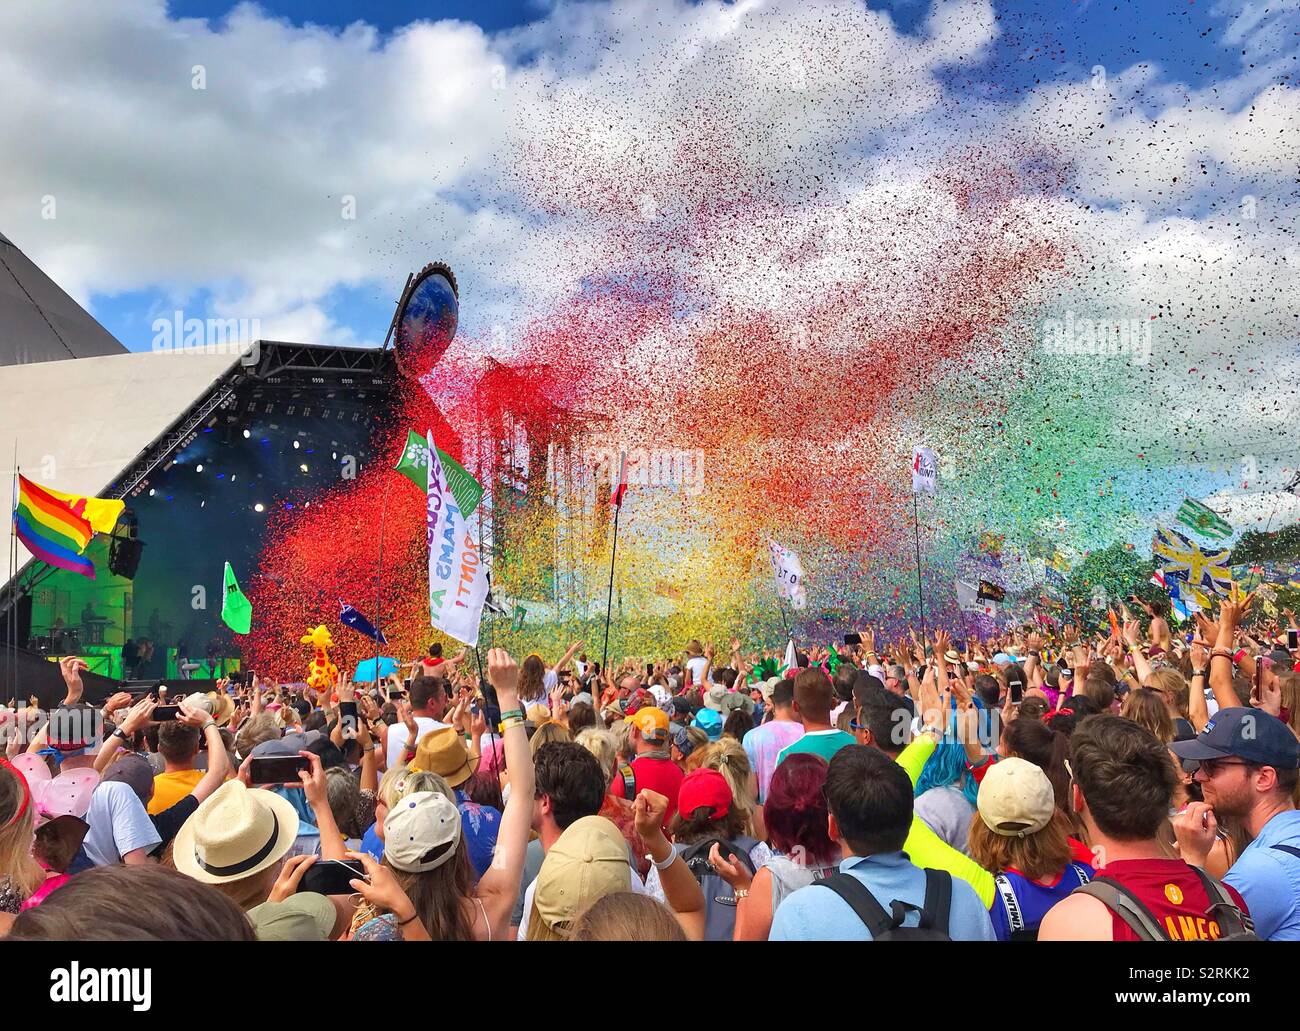 A cloud of rainbow coloured confetti over the crowd at the great set played by Years & Years at the Glastonbury Festival 2019 Stock Photo